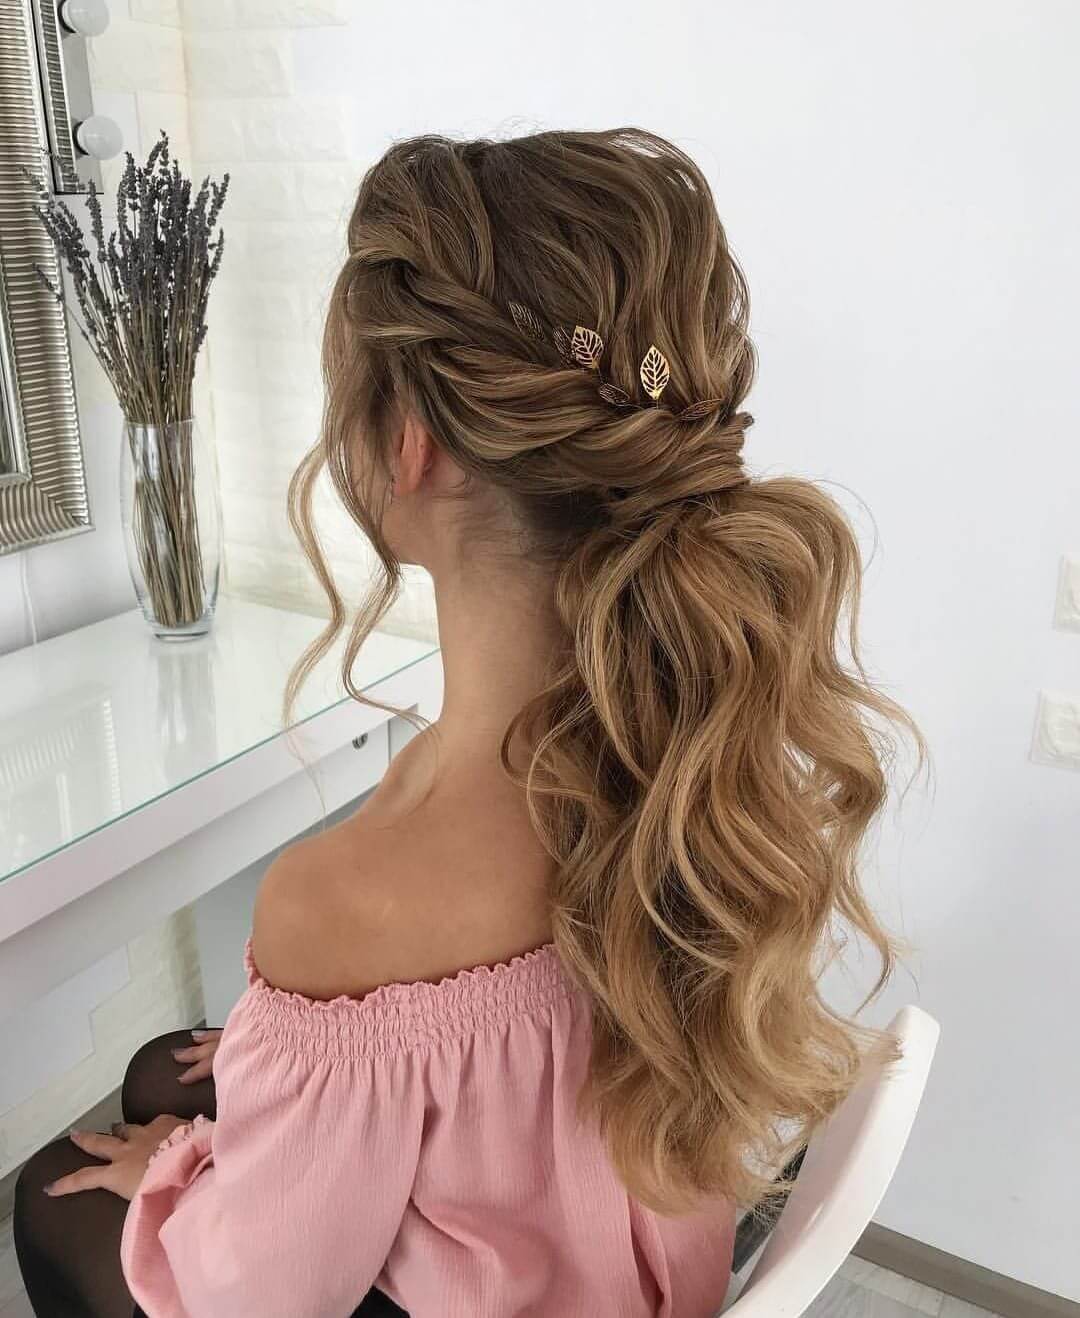 Image of Braided Ponytail hairstyle for junior bridesmaids